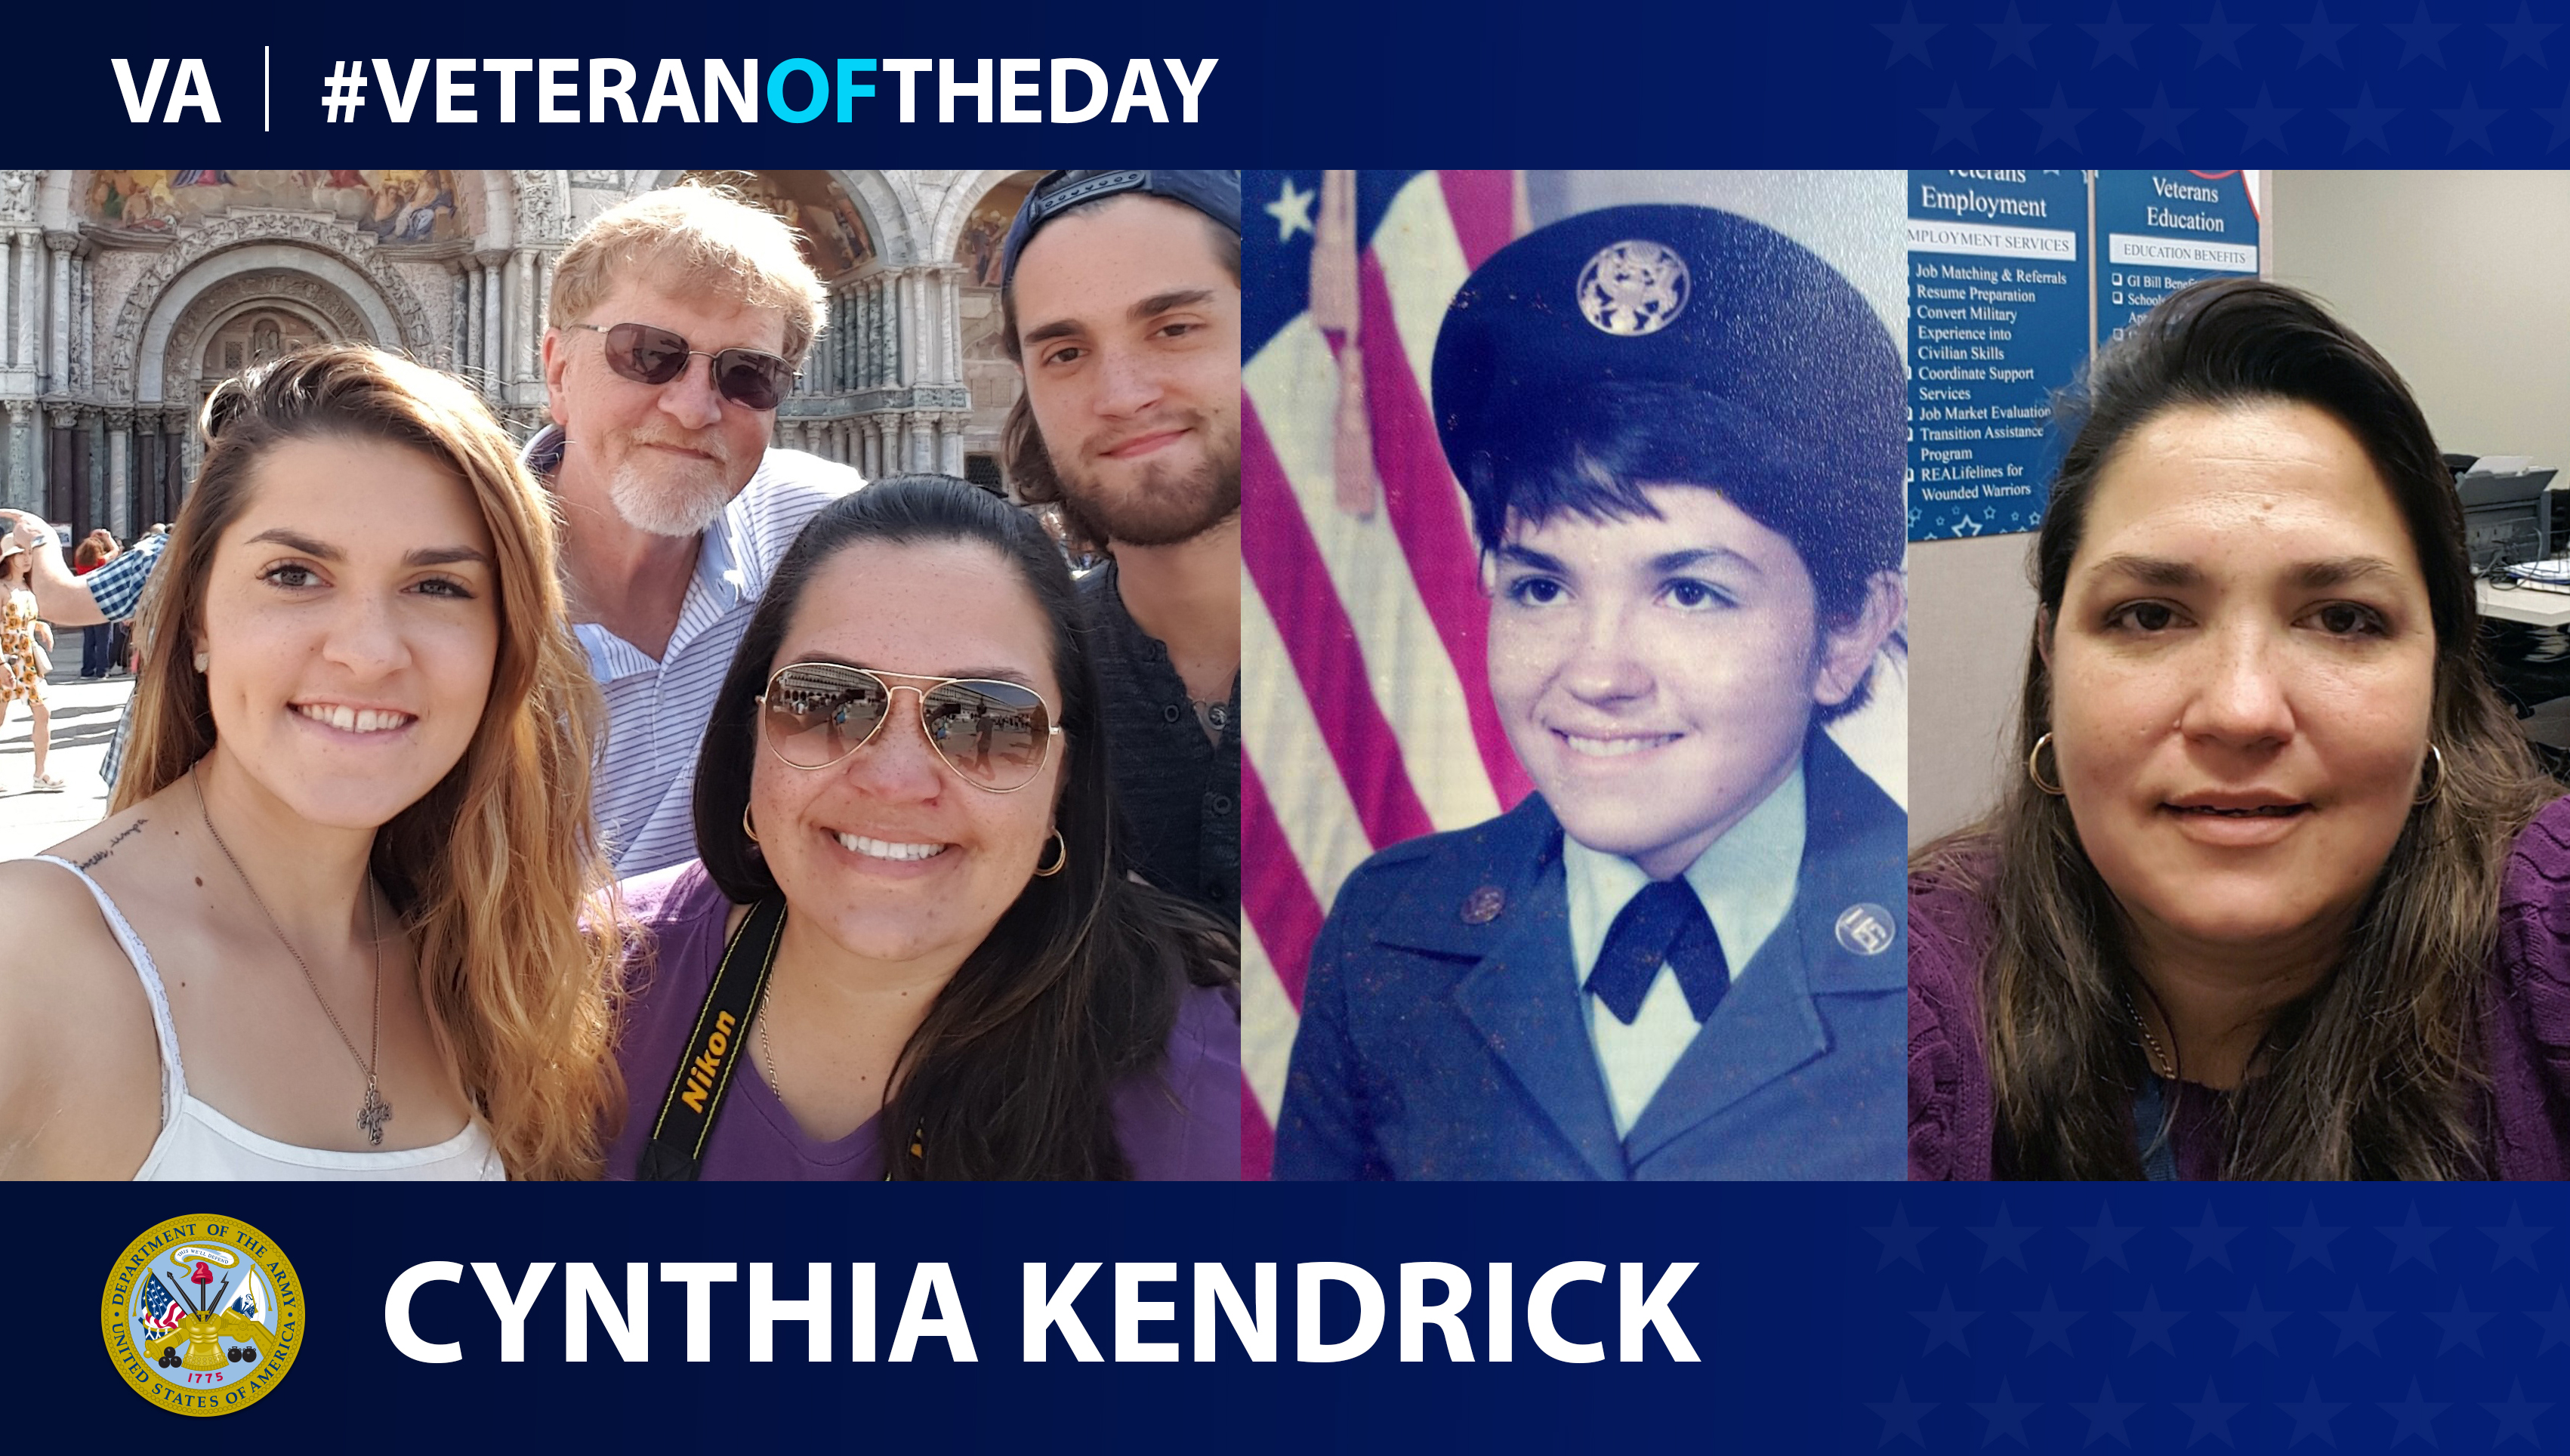 Army Veteran Cindy Kendrick is today's Veteran of the Day.